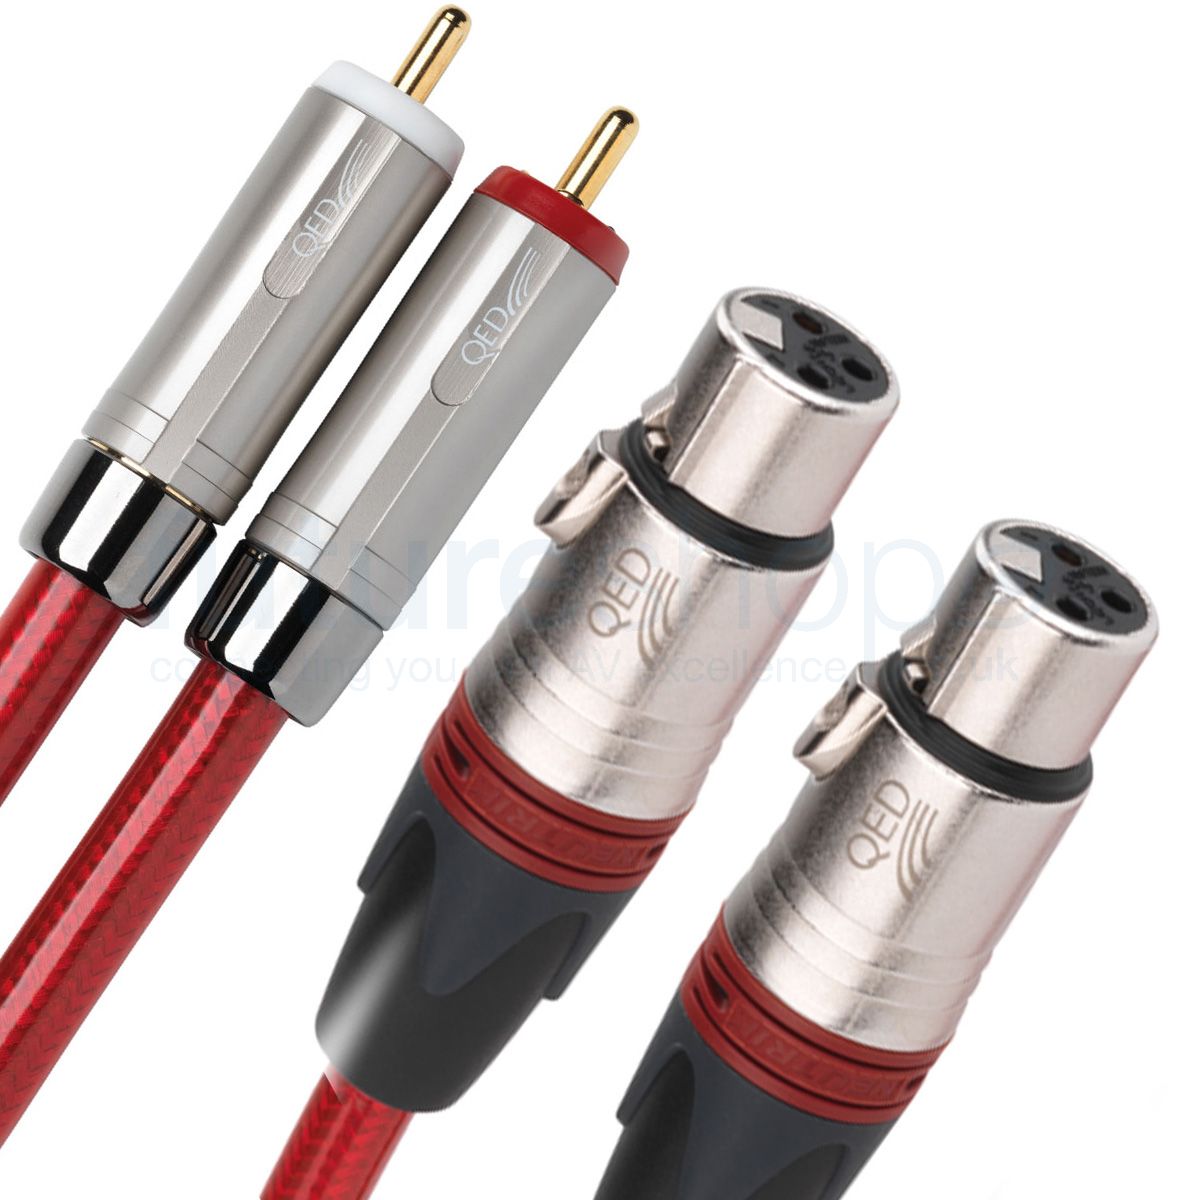 Qed xlr cable